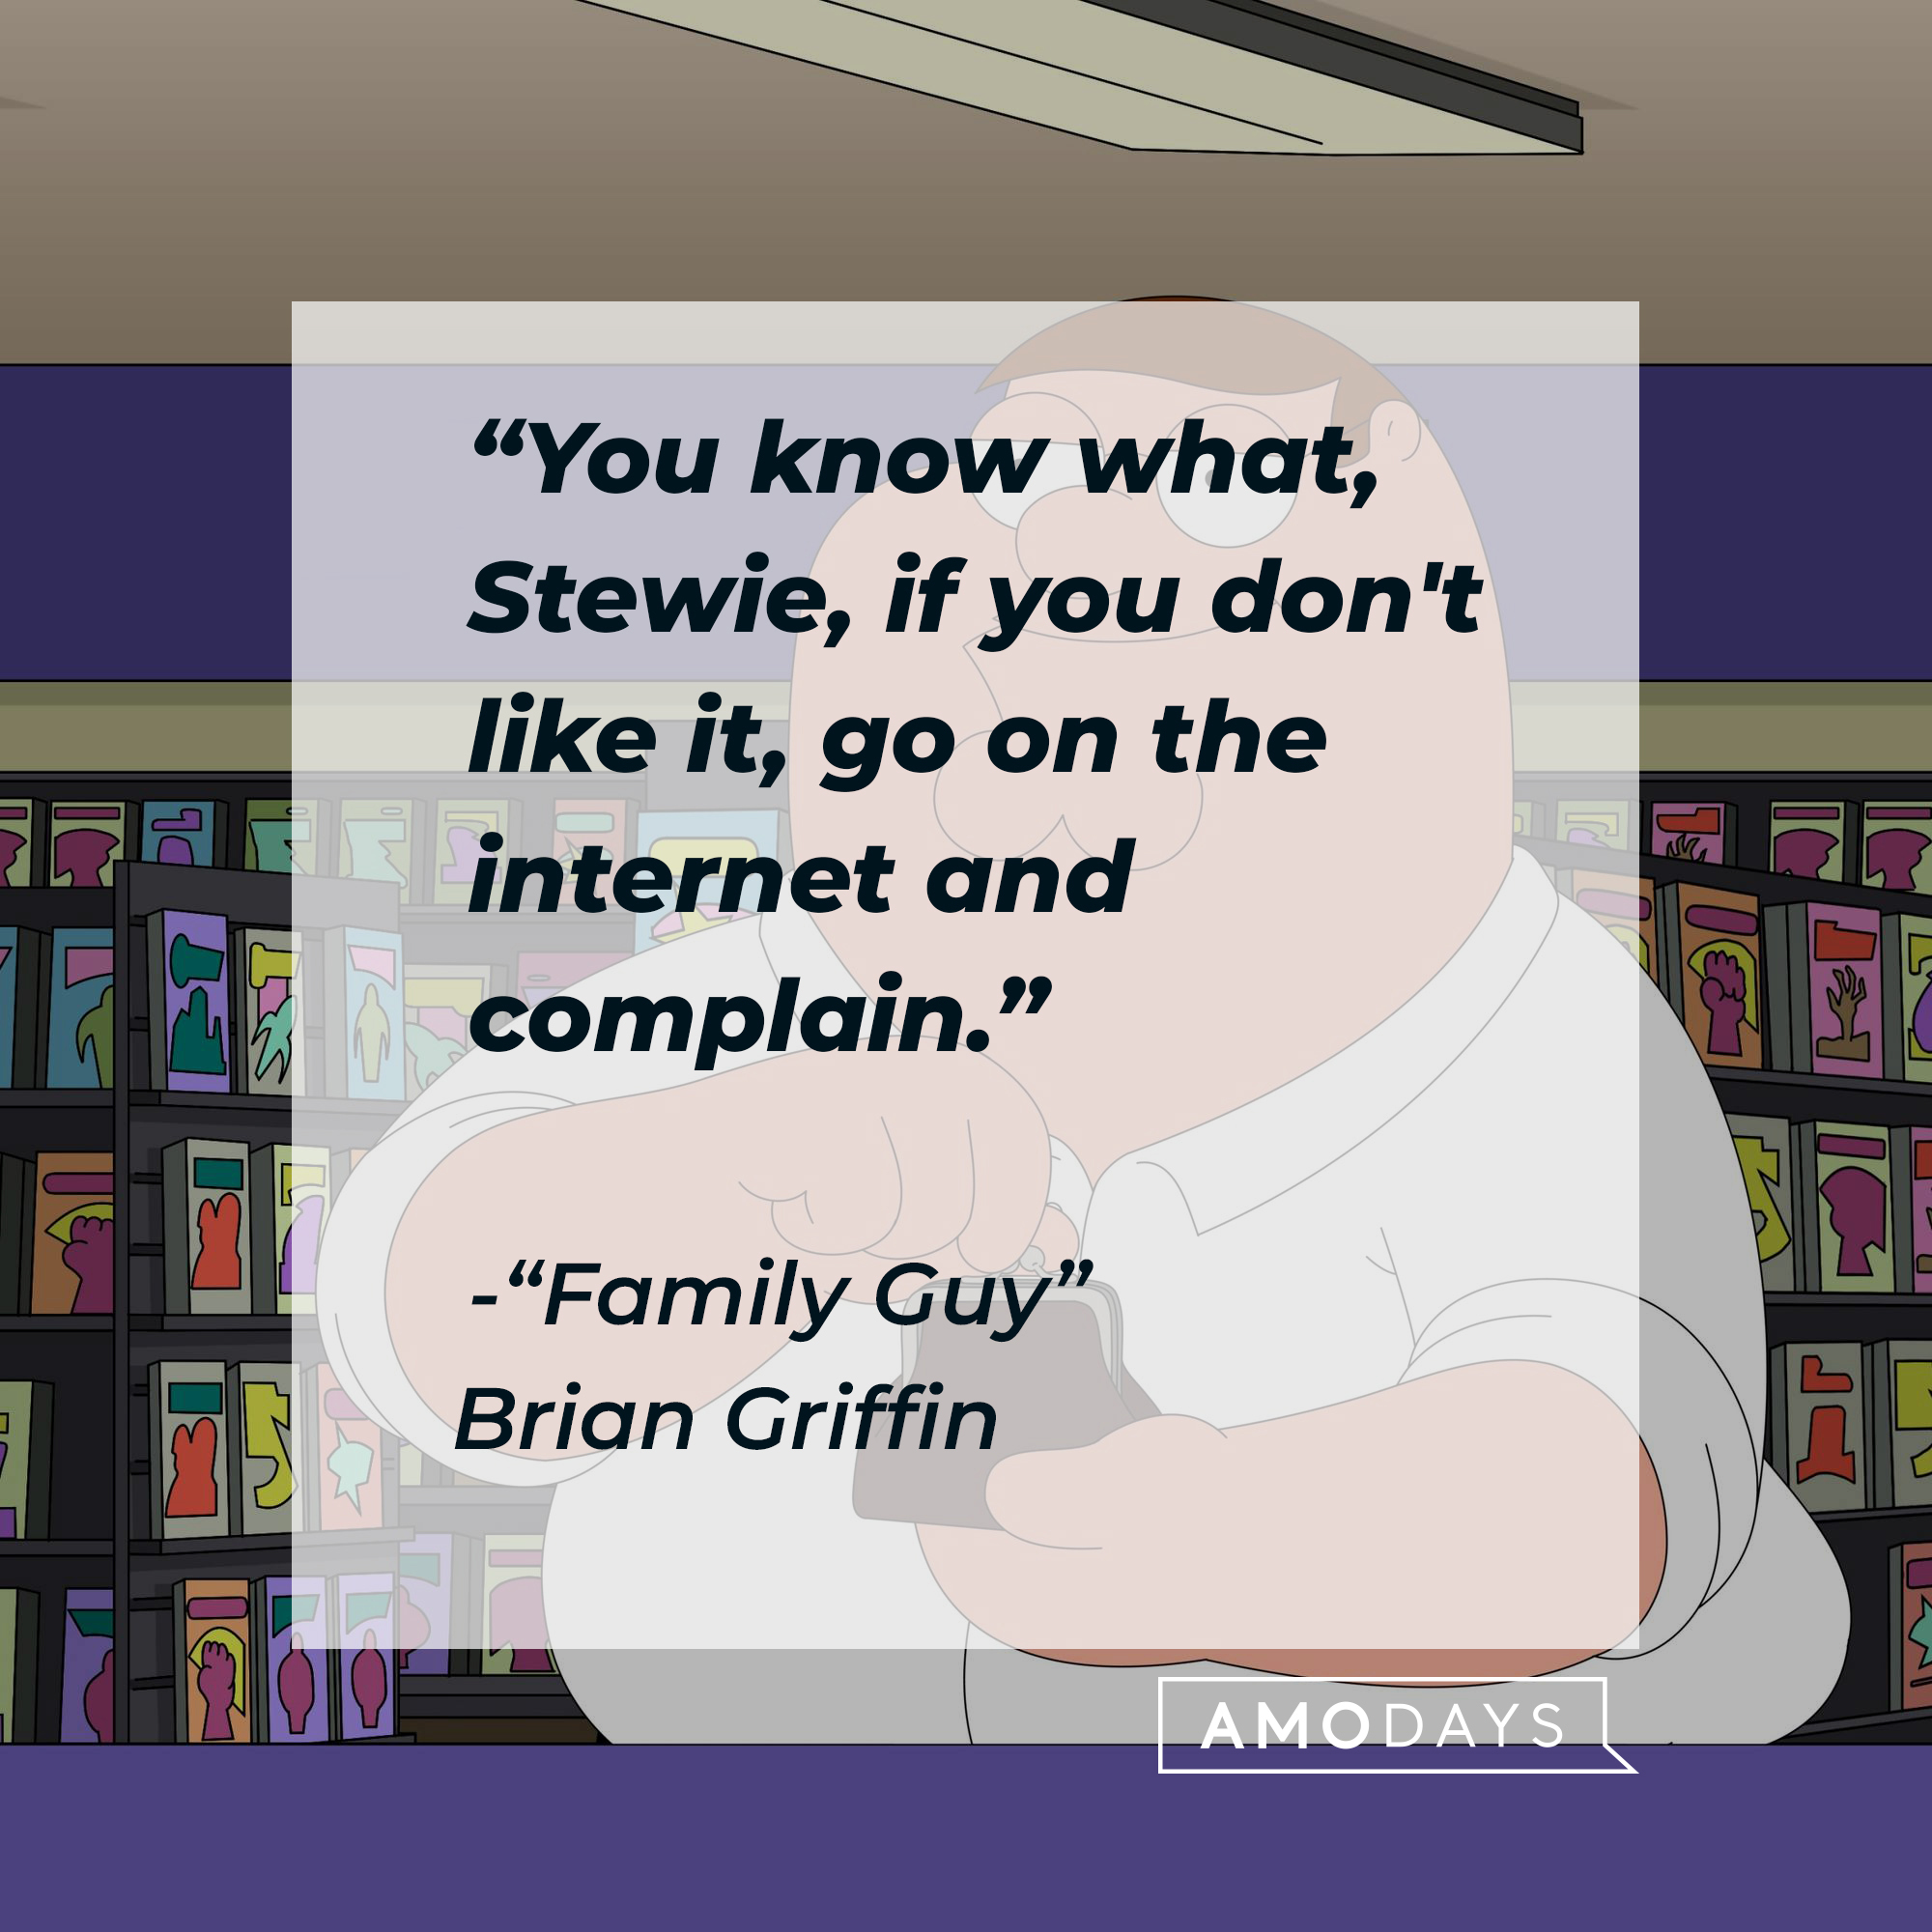 Peter Griffin with Brian Griffin's quote: “You know what, Stewie, if you don't like it, go on the internet and complain." | Source: Facebook.com/FamilyGuy